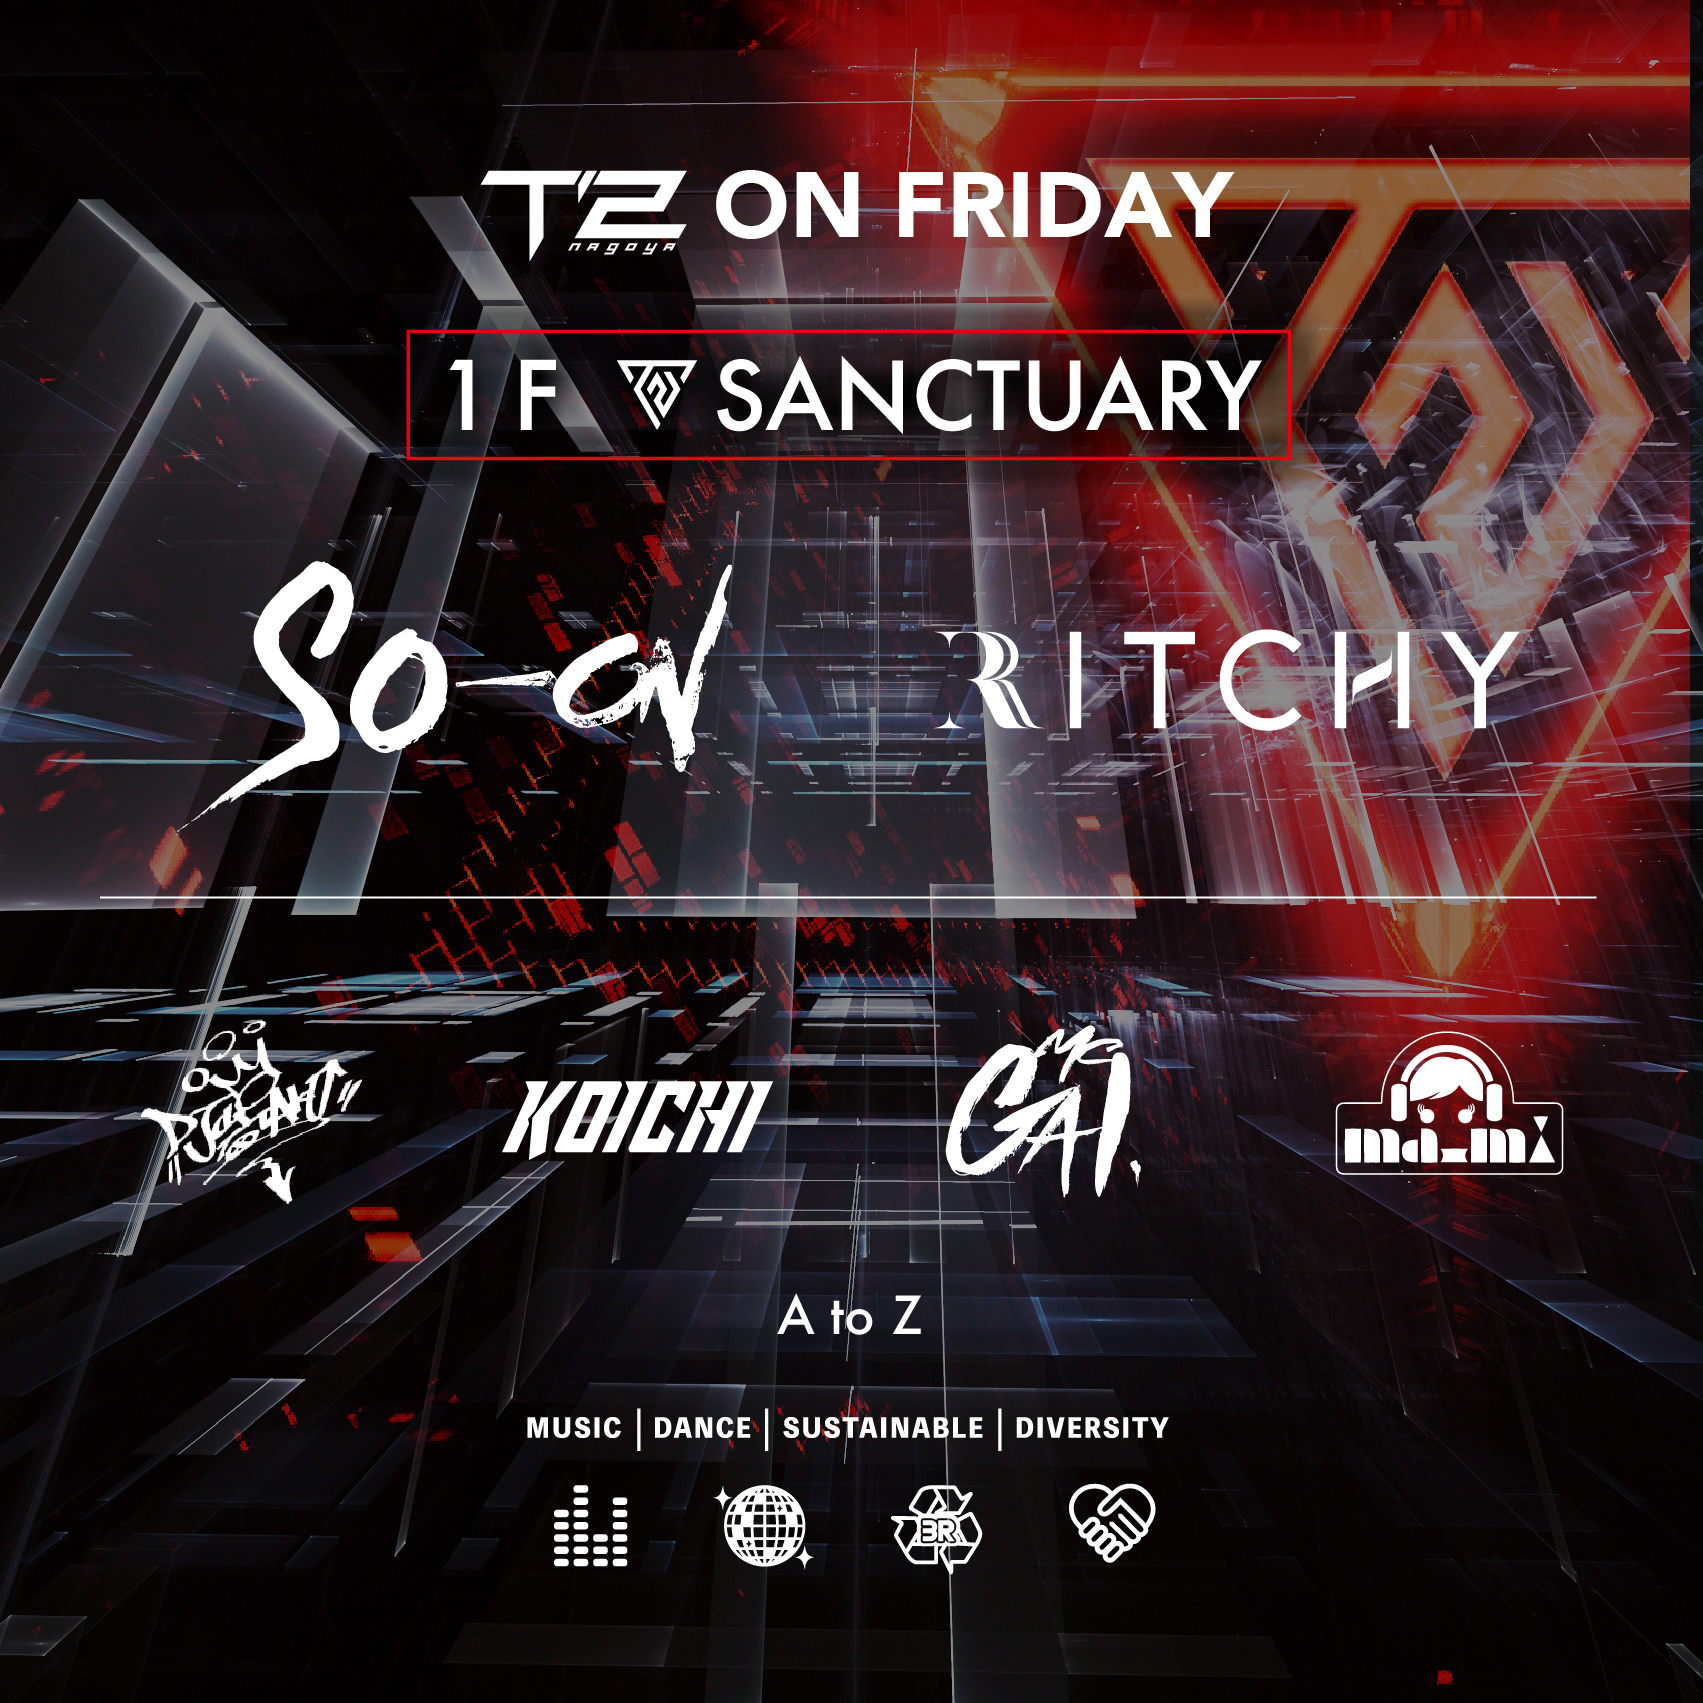 T2 ON FRIDAY